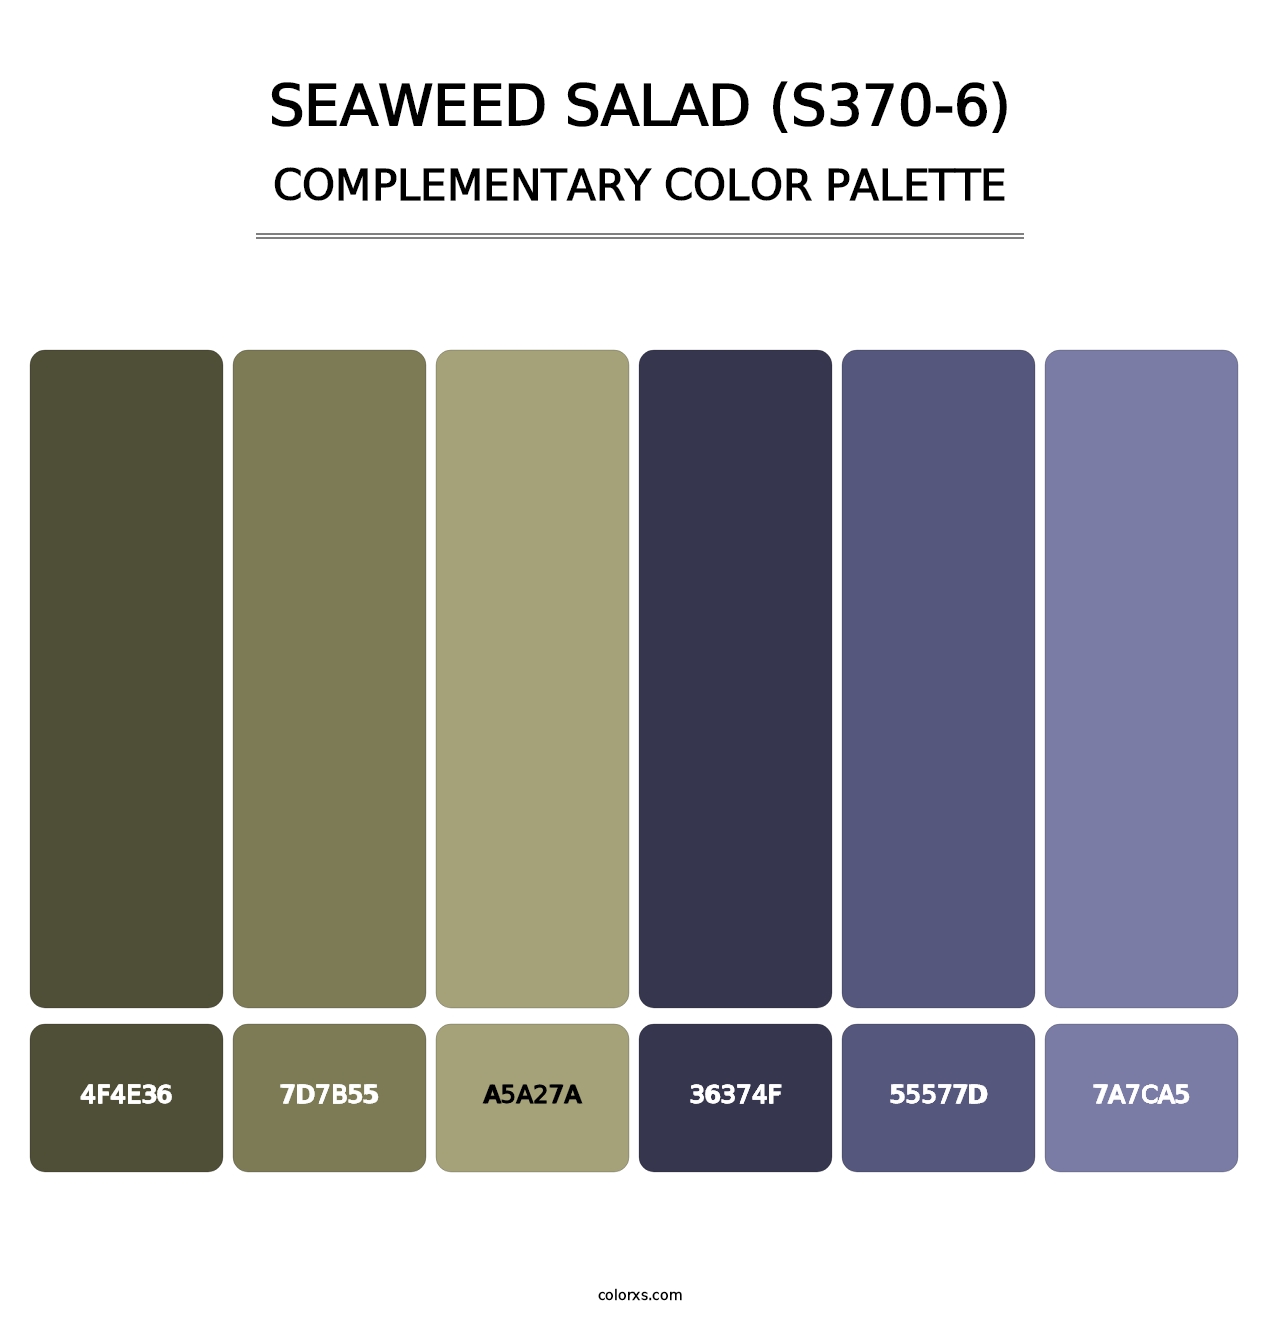 Seaweed Salad (S370-6) - Complementary Color Palette